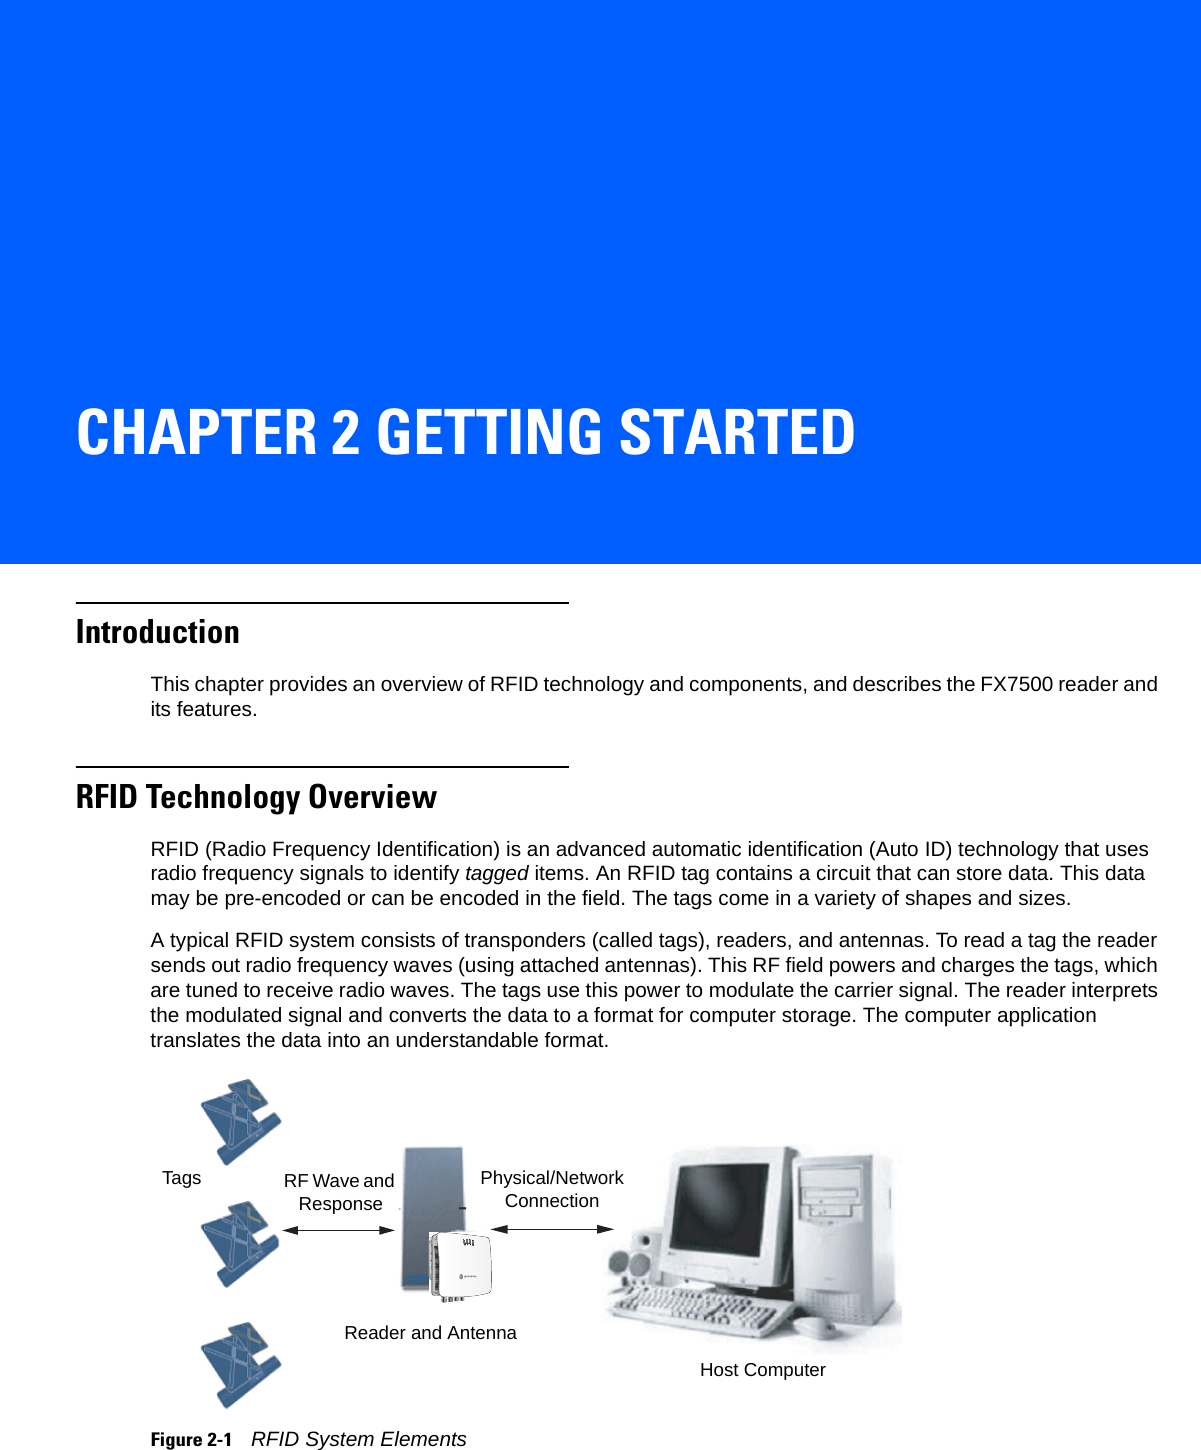 CHAPTER 2 GETTING STARTEDIntroductionThis chapter provides an overview of RFID technology and components, and describes the FX7500 reader and its features.RFID Technology OverviewRFID (Radio Frequency Identification) is an advanced automatic identification (Auto ID) technology that uses radio frequency signals to identify tagged items. An RFID tag contains a circuit that can store data. This data may be pre-encoded or can be encoded in the field. The tags come in a variety of shapes and sizes. A typical RFID system consists of transponders (called tags), readers, and antennas. To read a tag the reader sends out radio frequency waves (using attached antennas). This RF field powers and charges the tags, which are tuned to receive radio waves. The tags use this power to modulate the carrier signal. The reader interprets the modulated signal and converts the data to a format for computer storage. The computer application translates the data into an understandable format.Figure 2-1    RFID System ElementsReader and AntennaHost ComputerPhysical/Network ConnectionRF Wave and ResponseTags